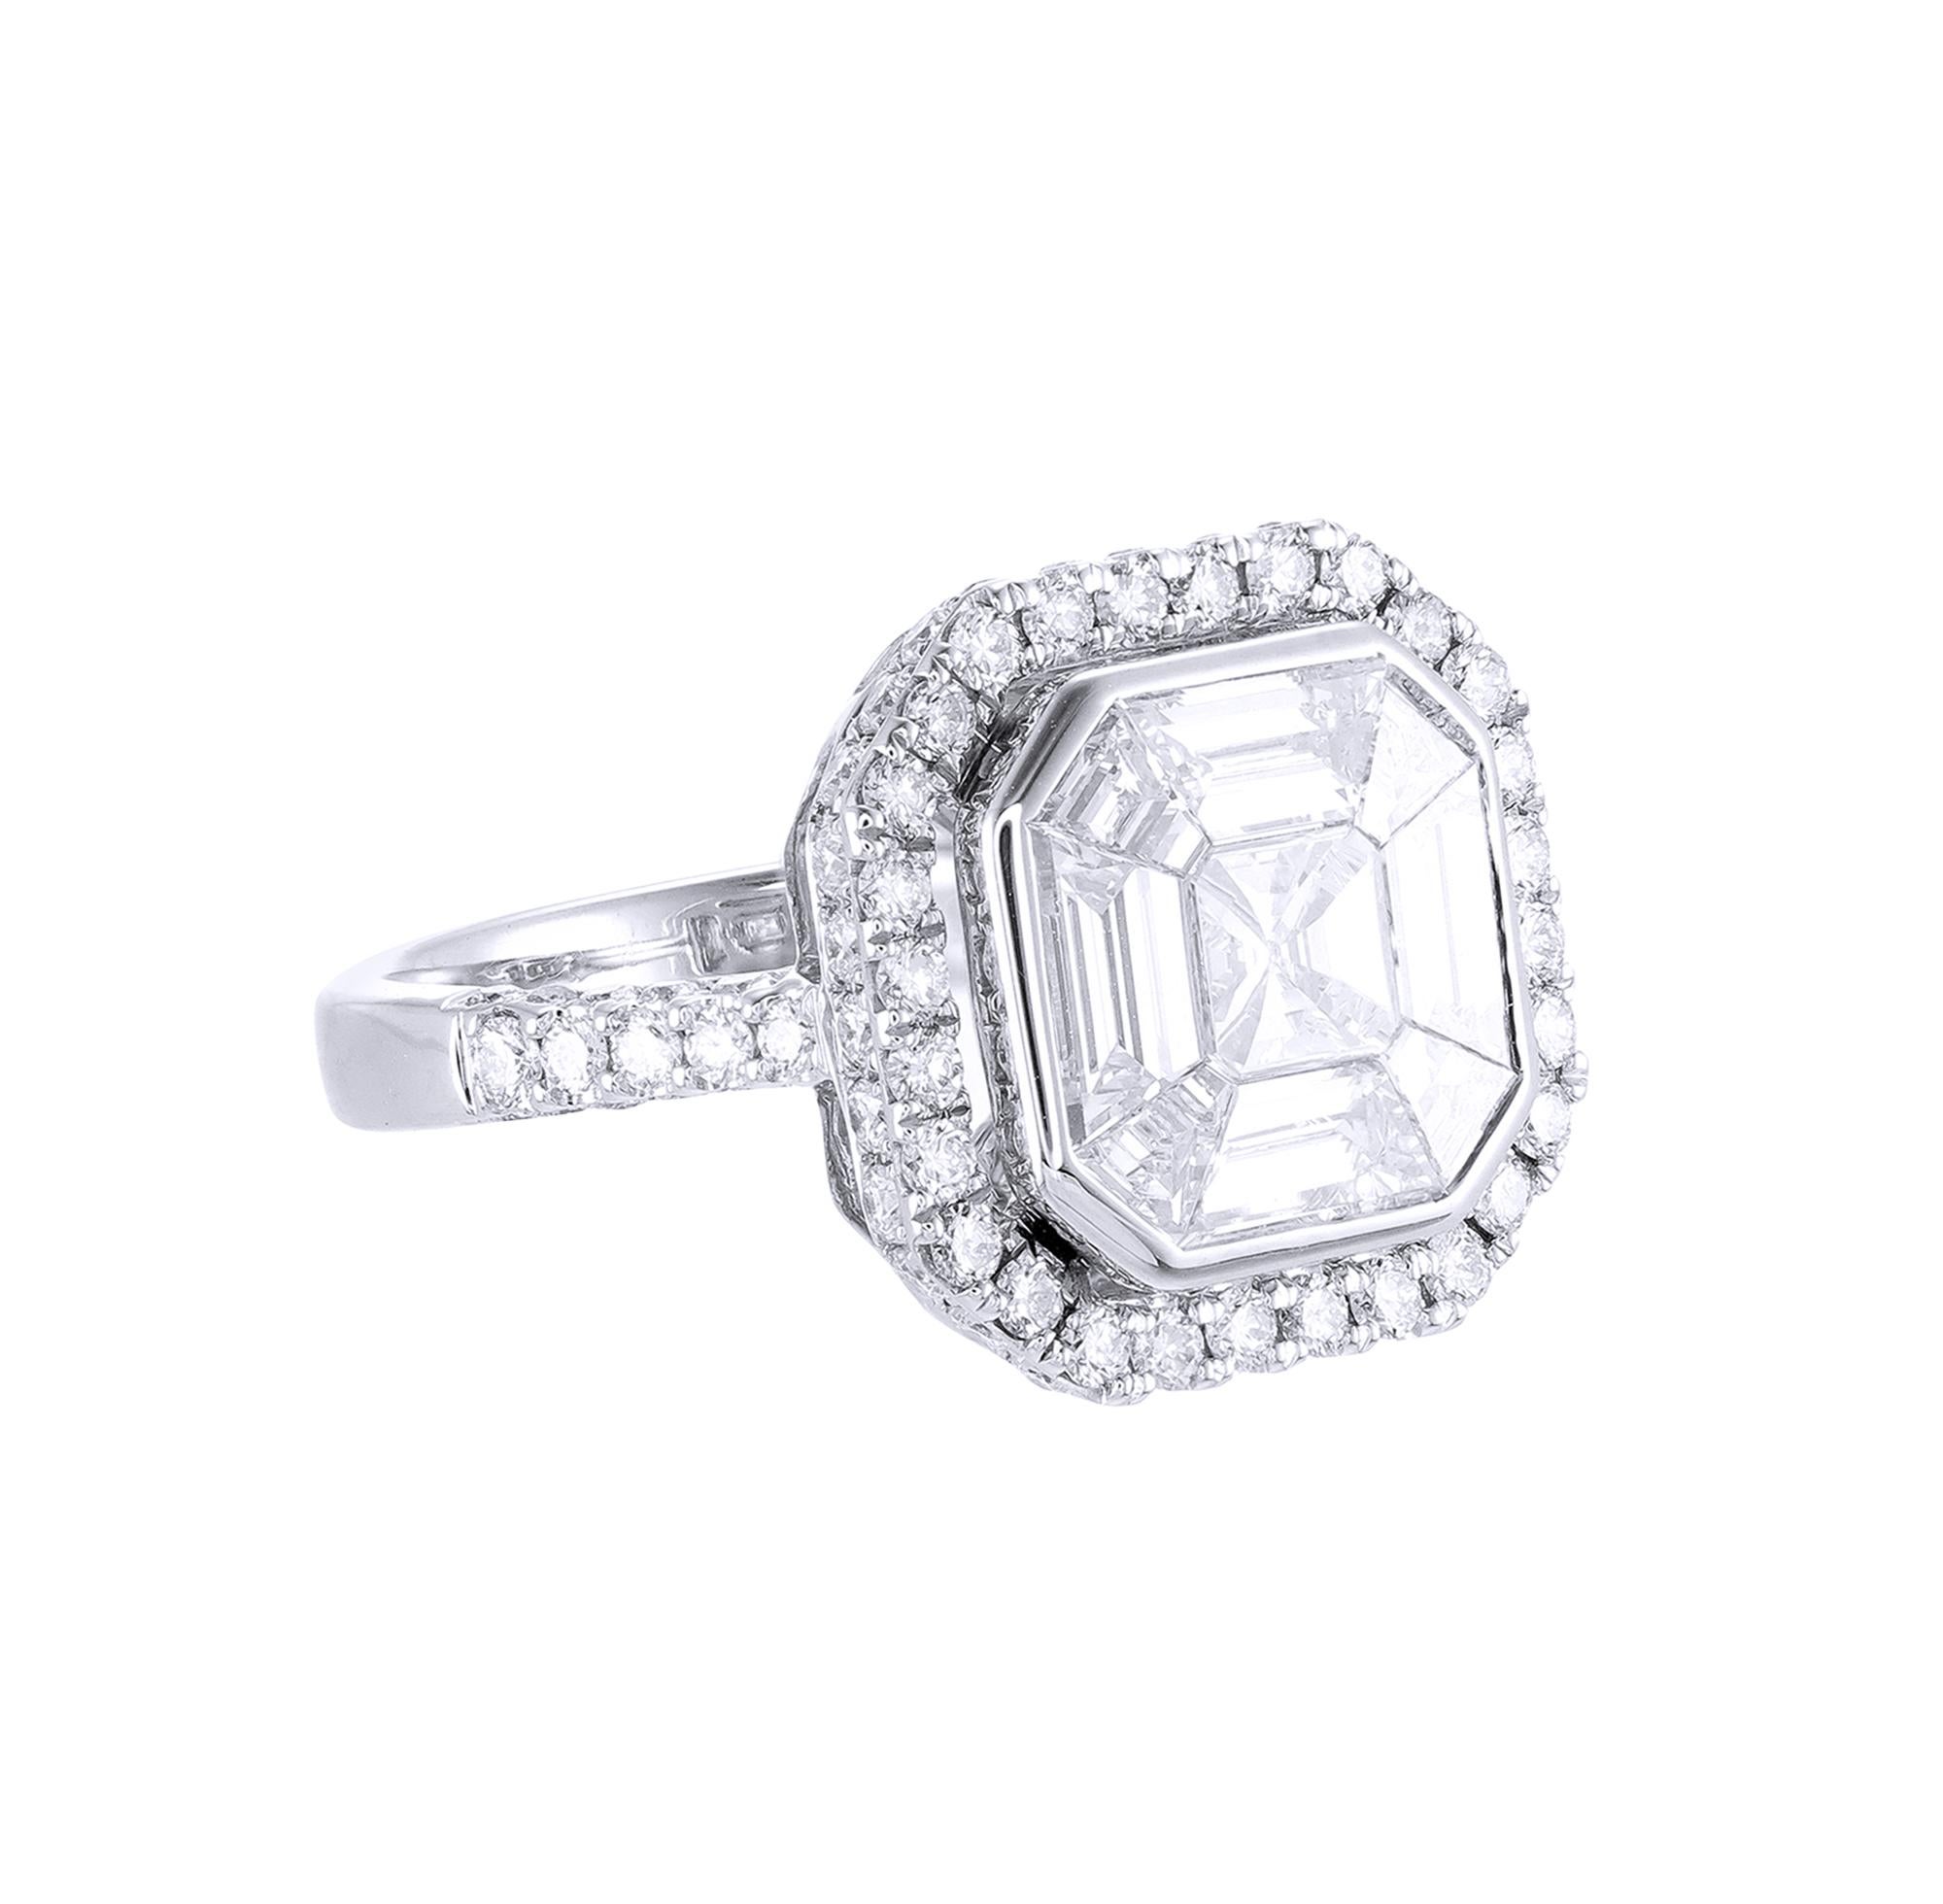 This diamond ring has a Asscher shape Illusion to create the look of 5.00 to 5.50 carat single Asscher cut stone surrounded beautifully with brilliant round diamonds, Handcrafted in 18 kt white gold, the total diamond weight of this ring is 2.77